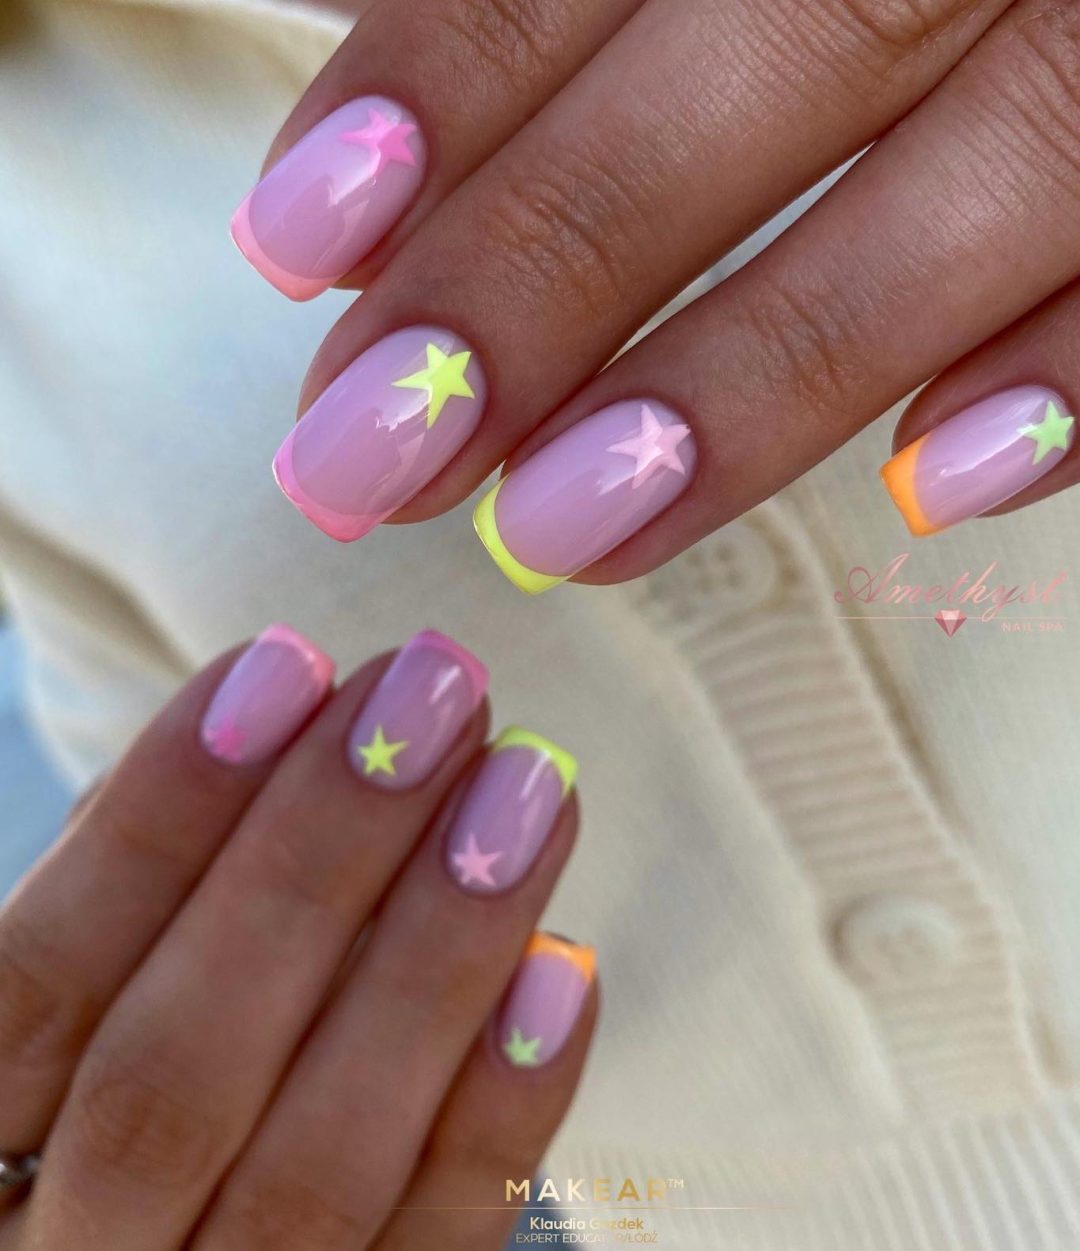 Pastel pink and neon yellow star nails